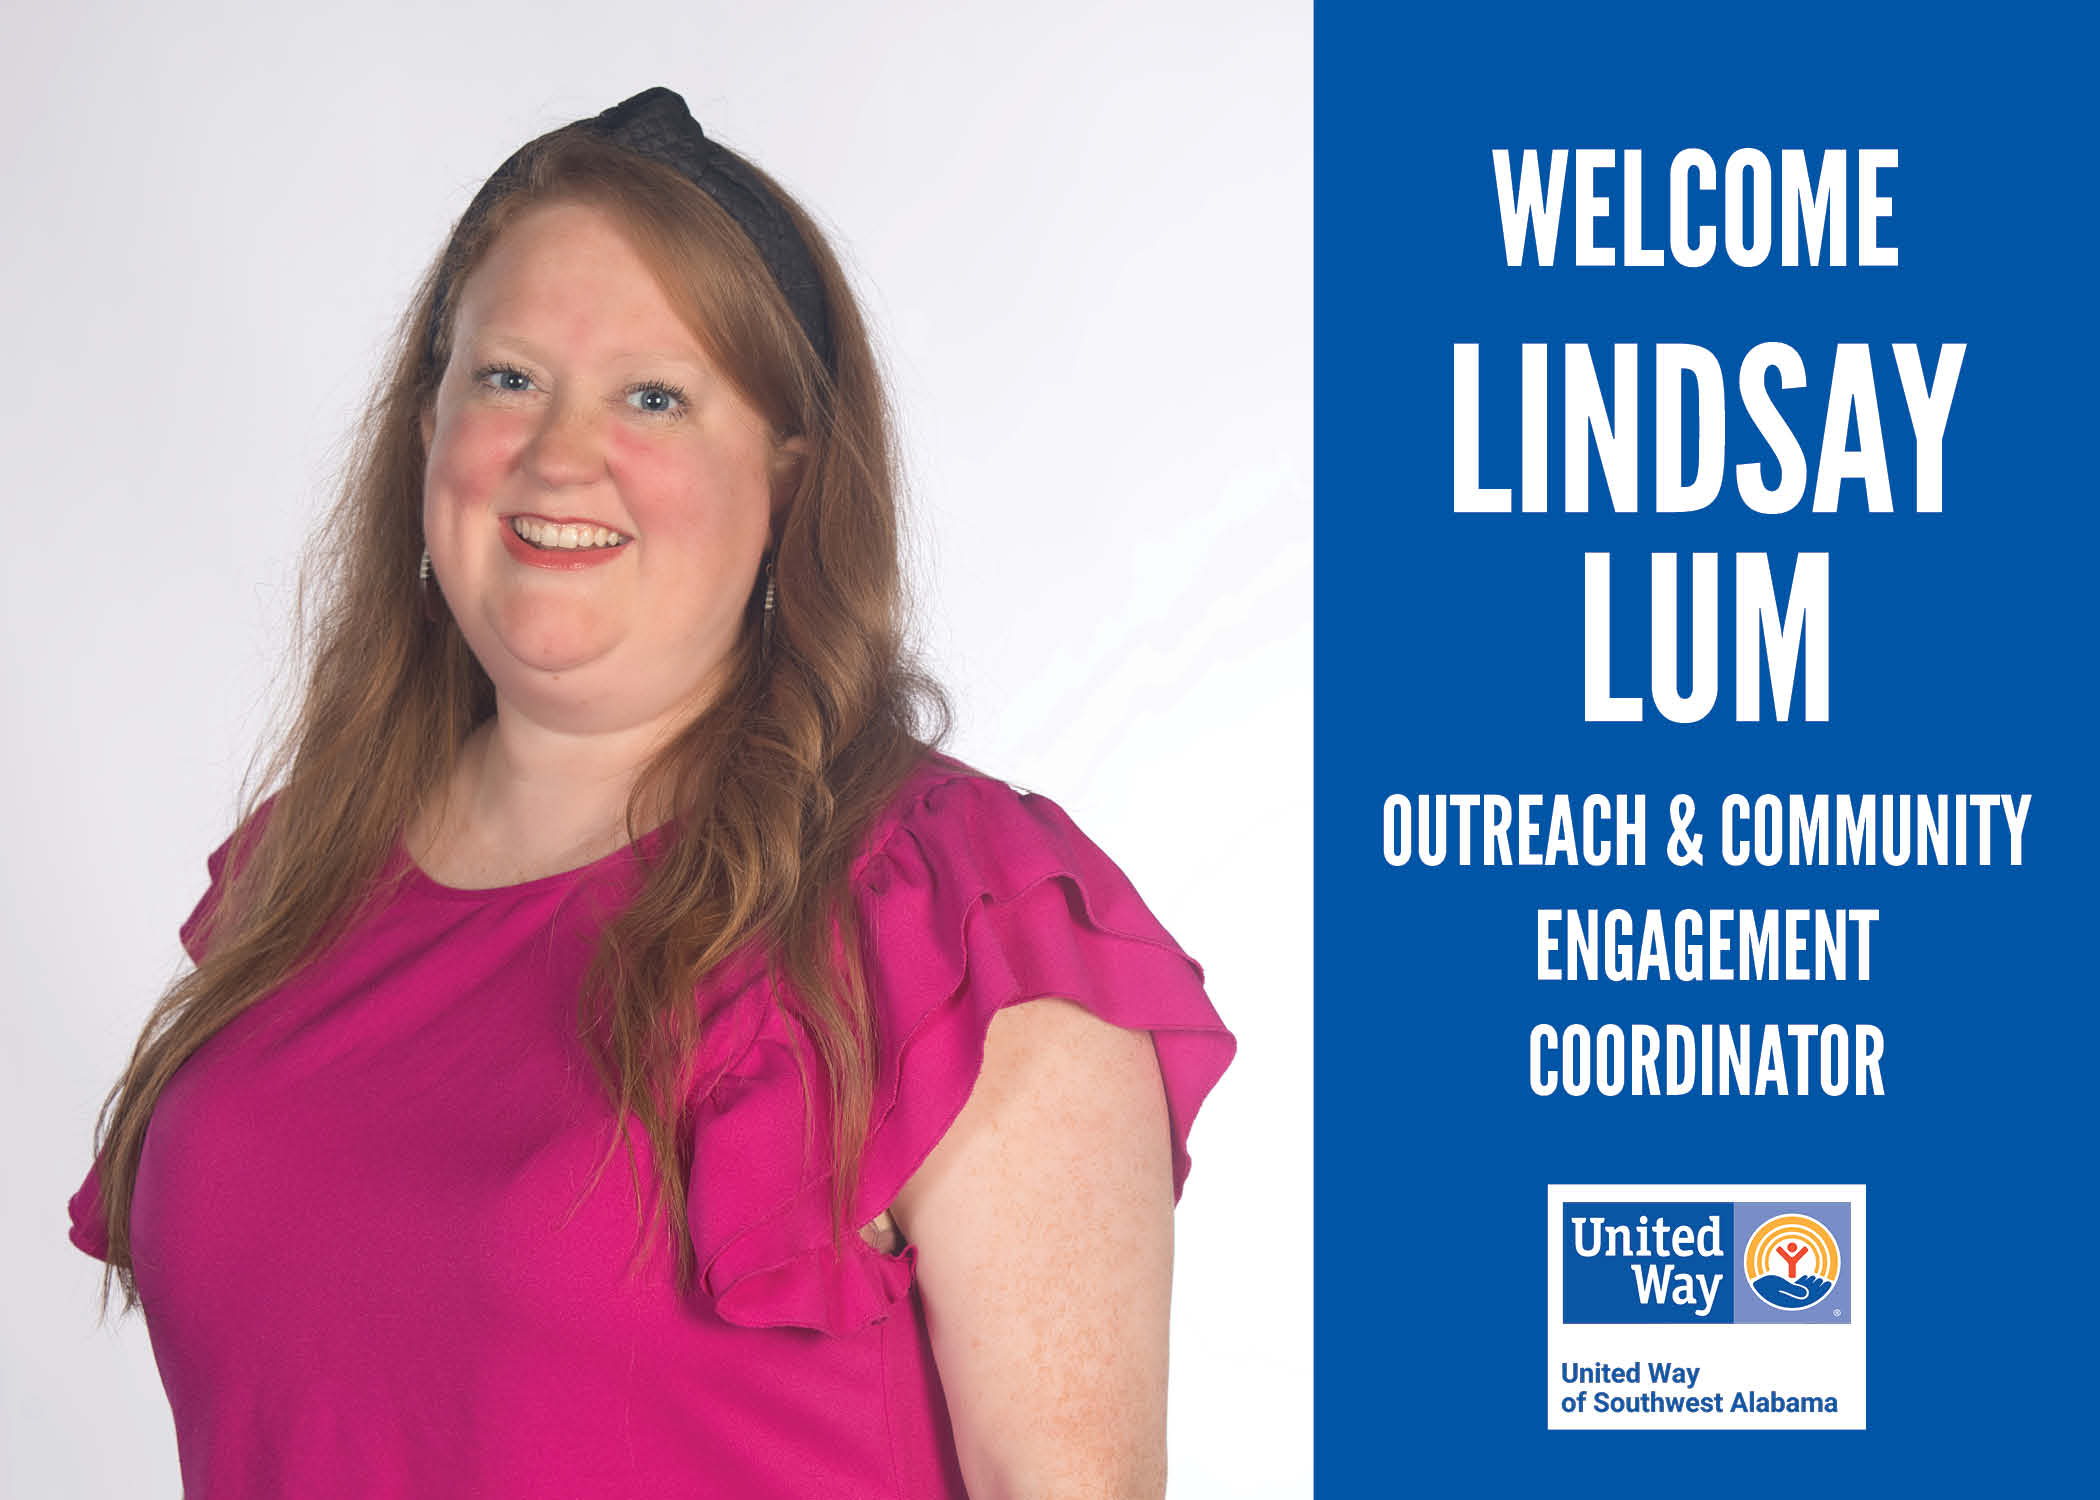 United Way Welcomes Lindsay Lum as the new Outreach & Community Engagement Coordinator. Image - smiling young woman with red hair wearing a fuchsia blouse with ruffled sleeves.